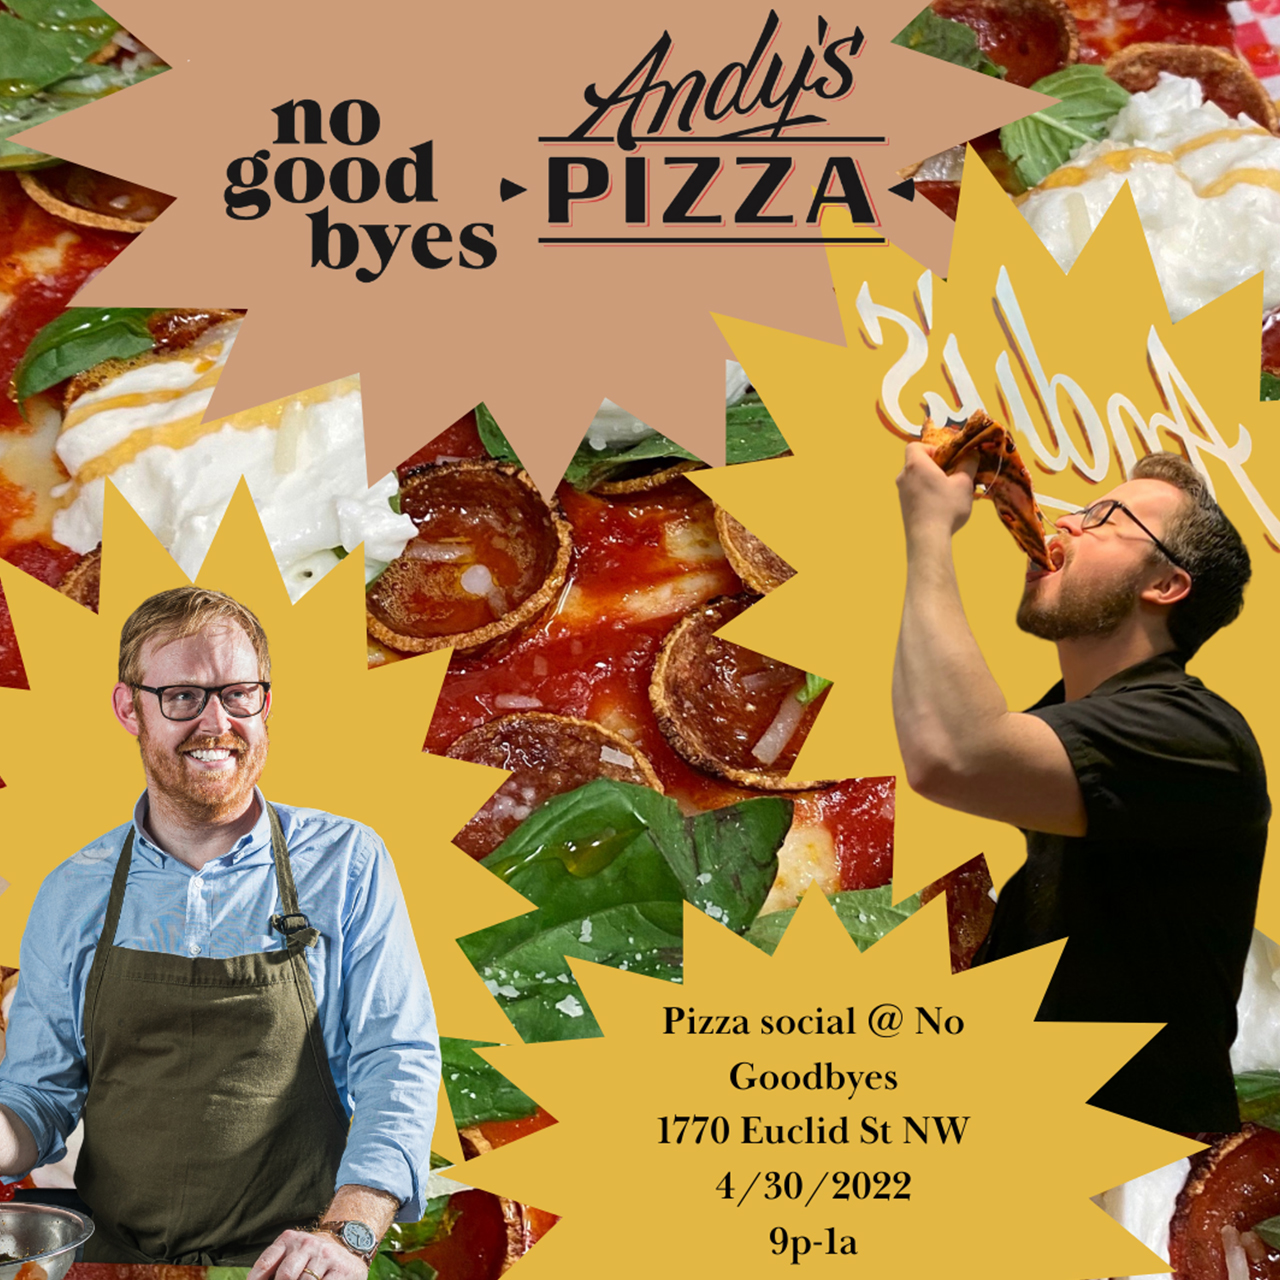 Pamphlet of Andy's pizza